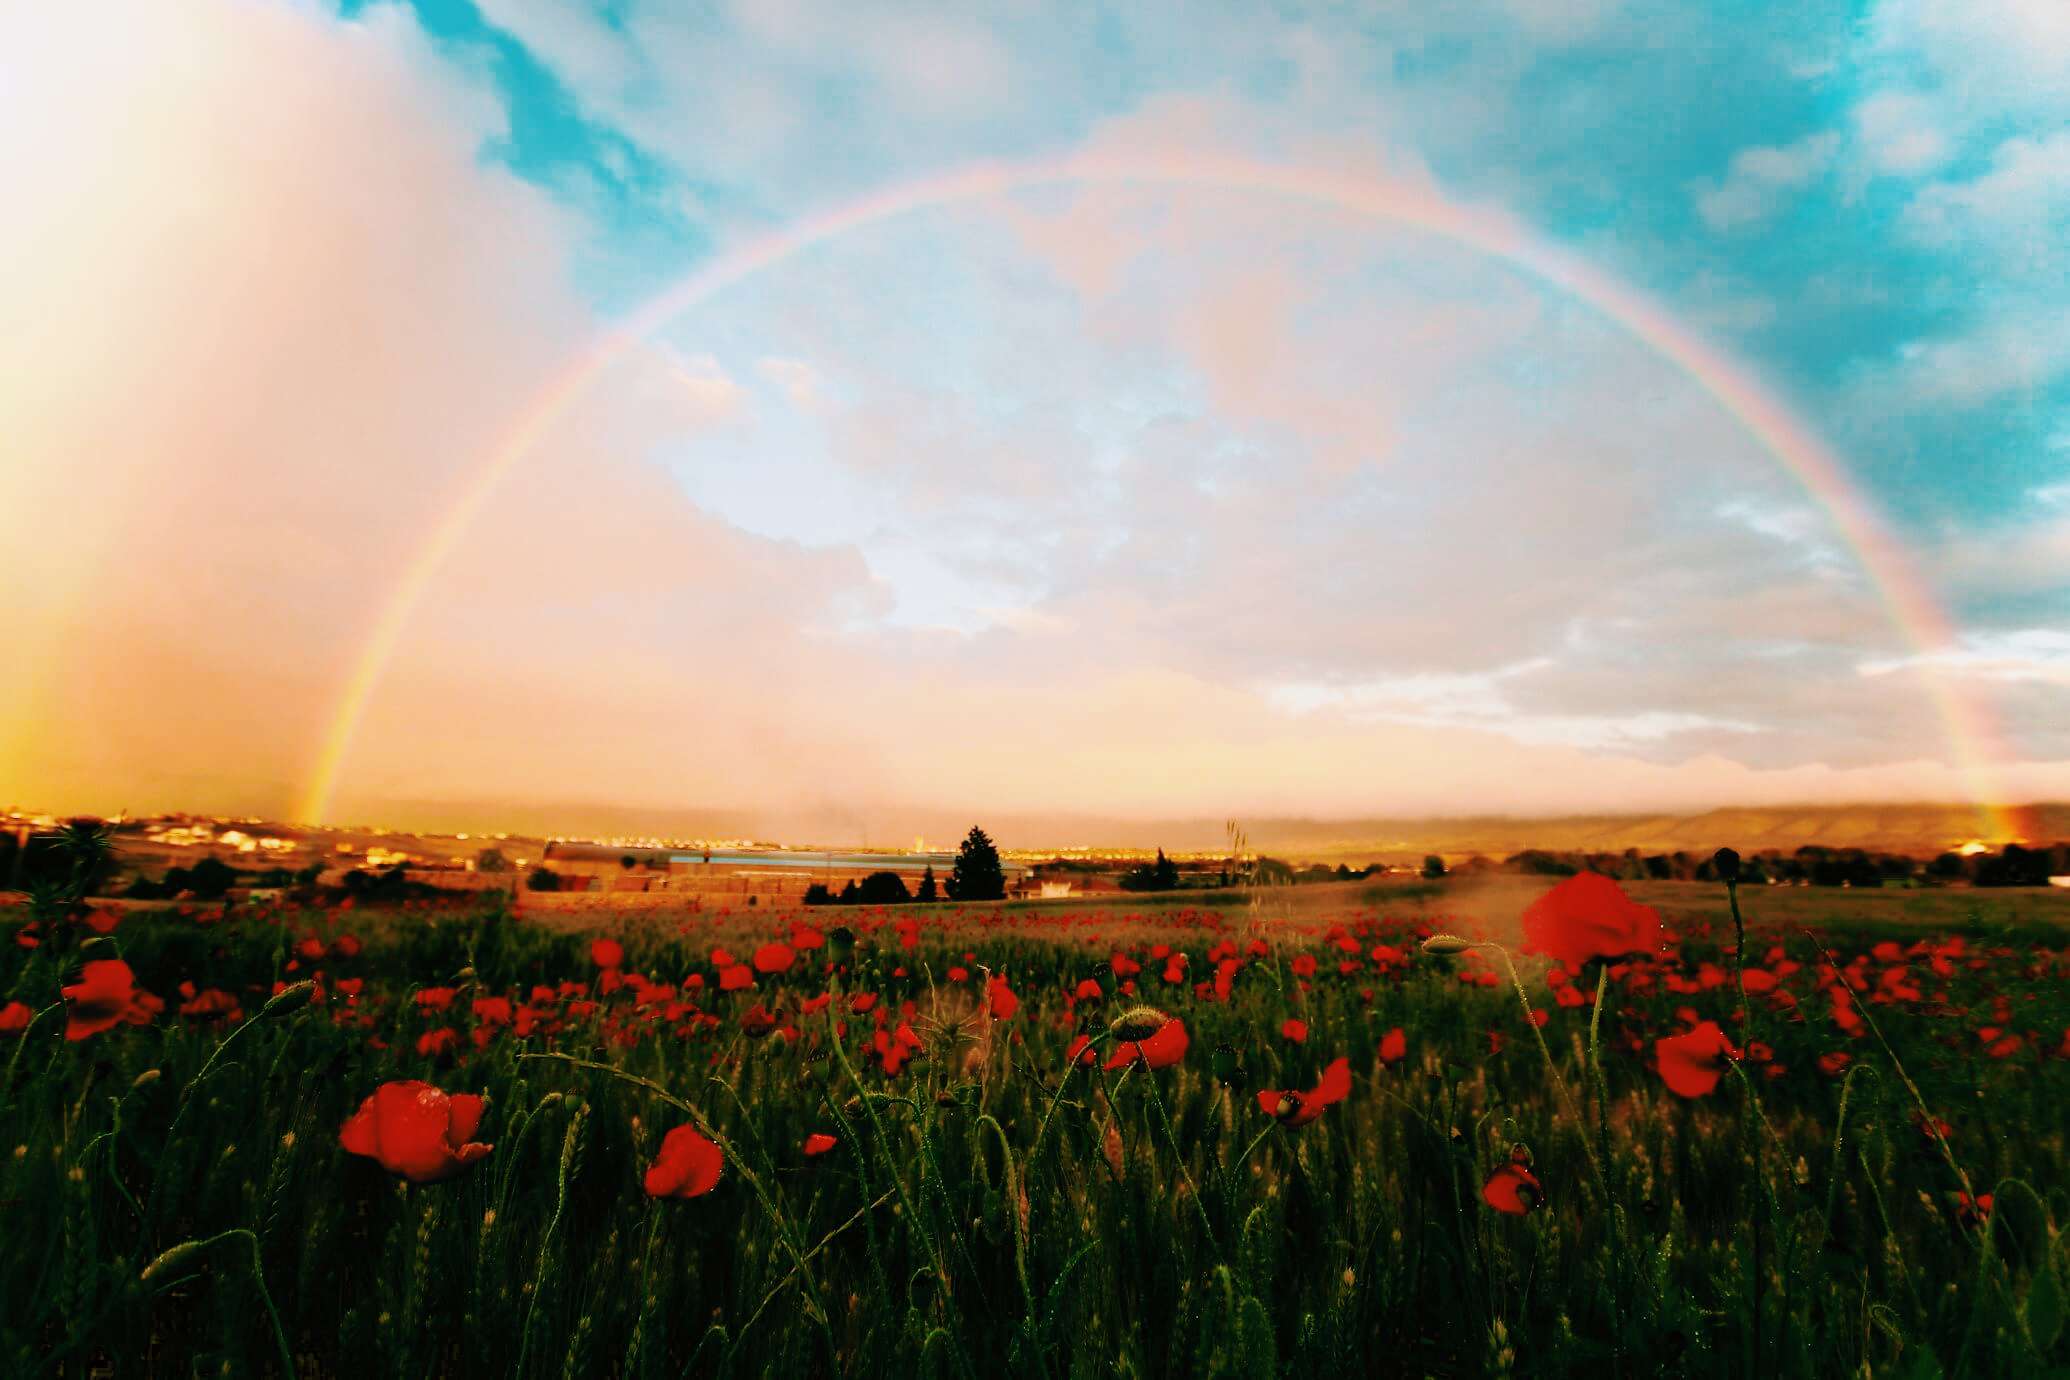 add landscape filter to a rainbow photo